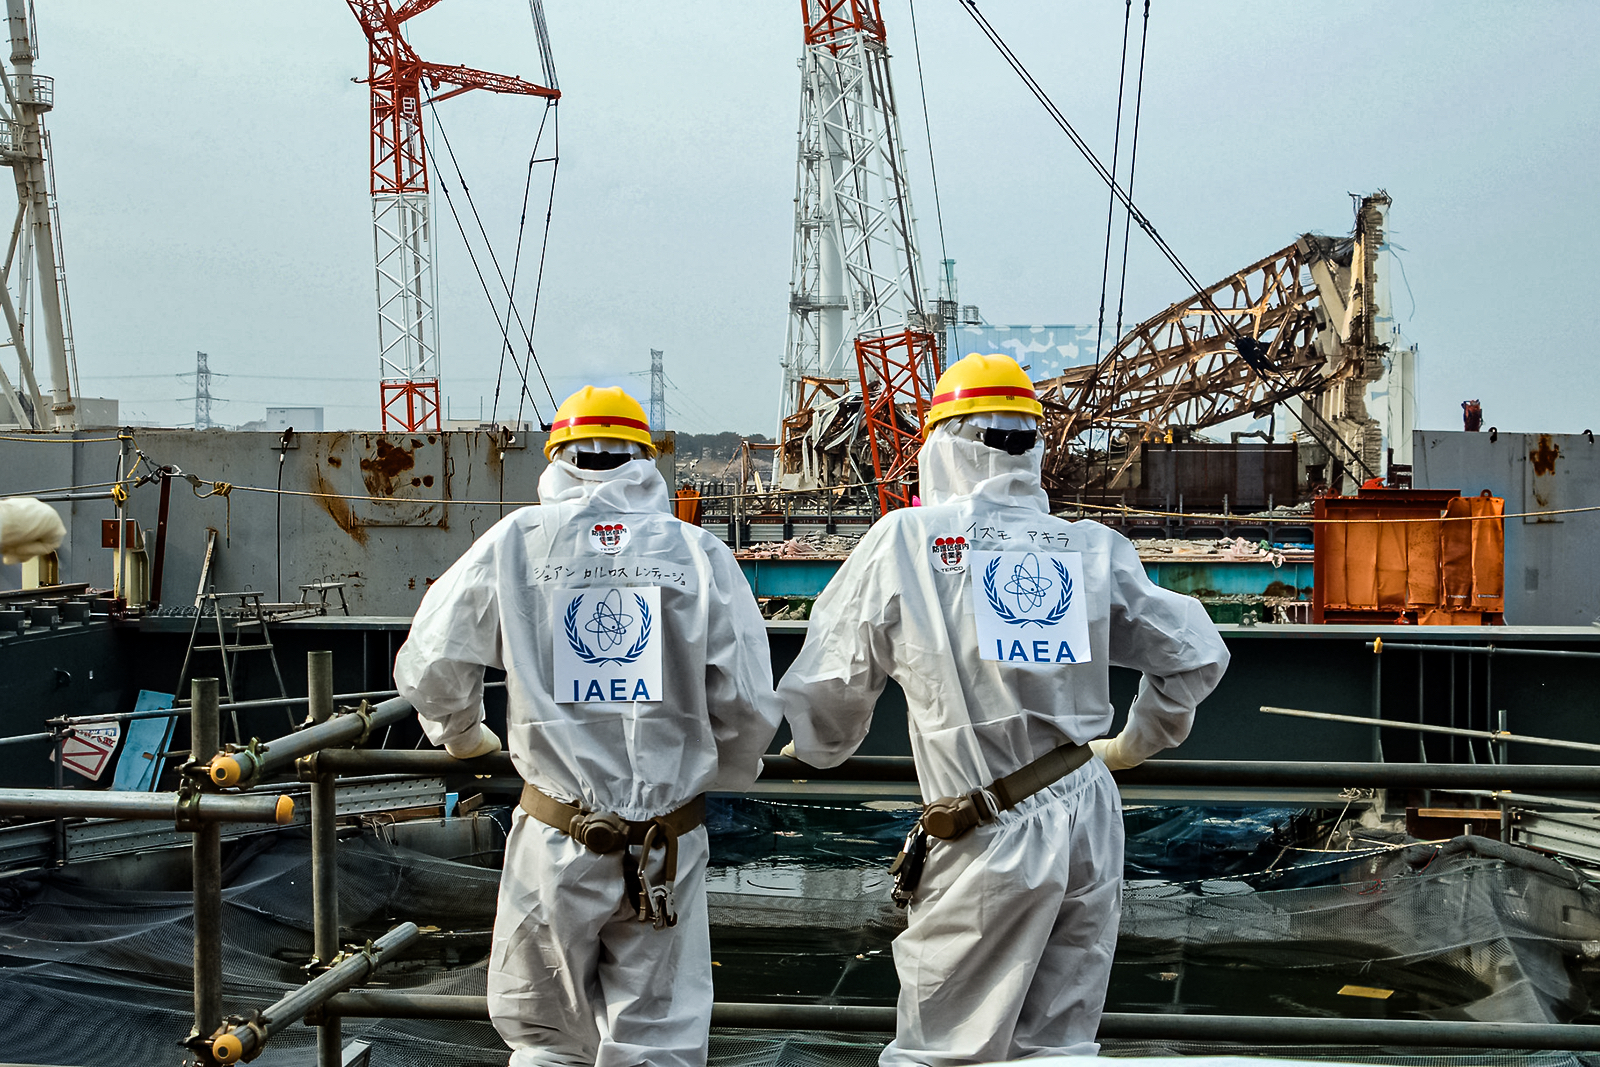 IAEA workers at the Fukushima nuclear plant in 2013